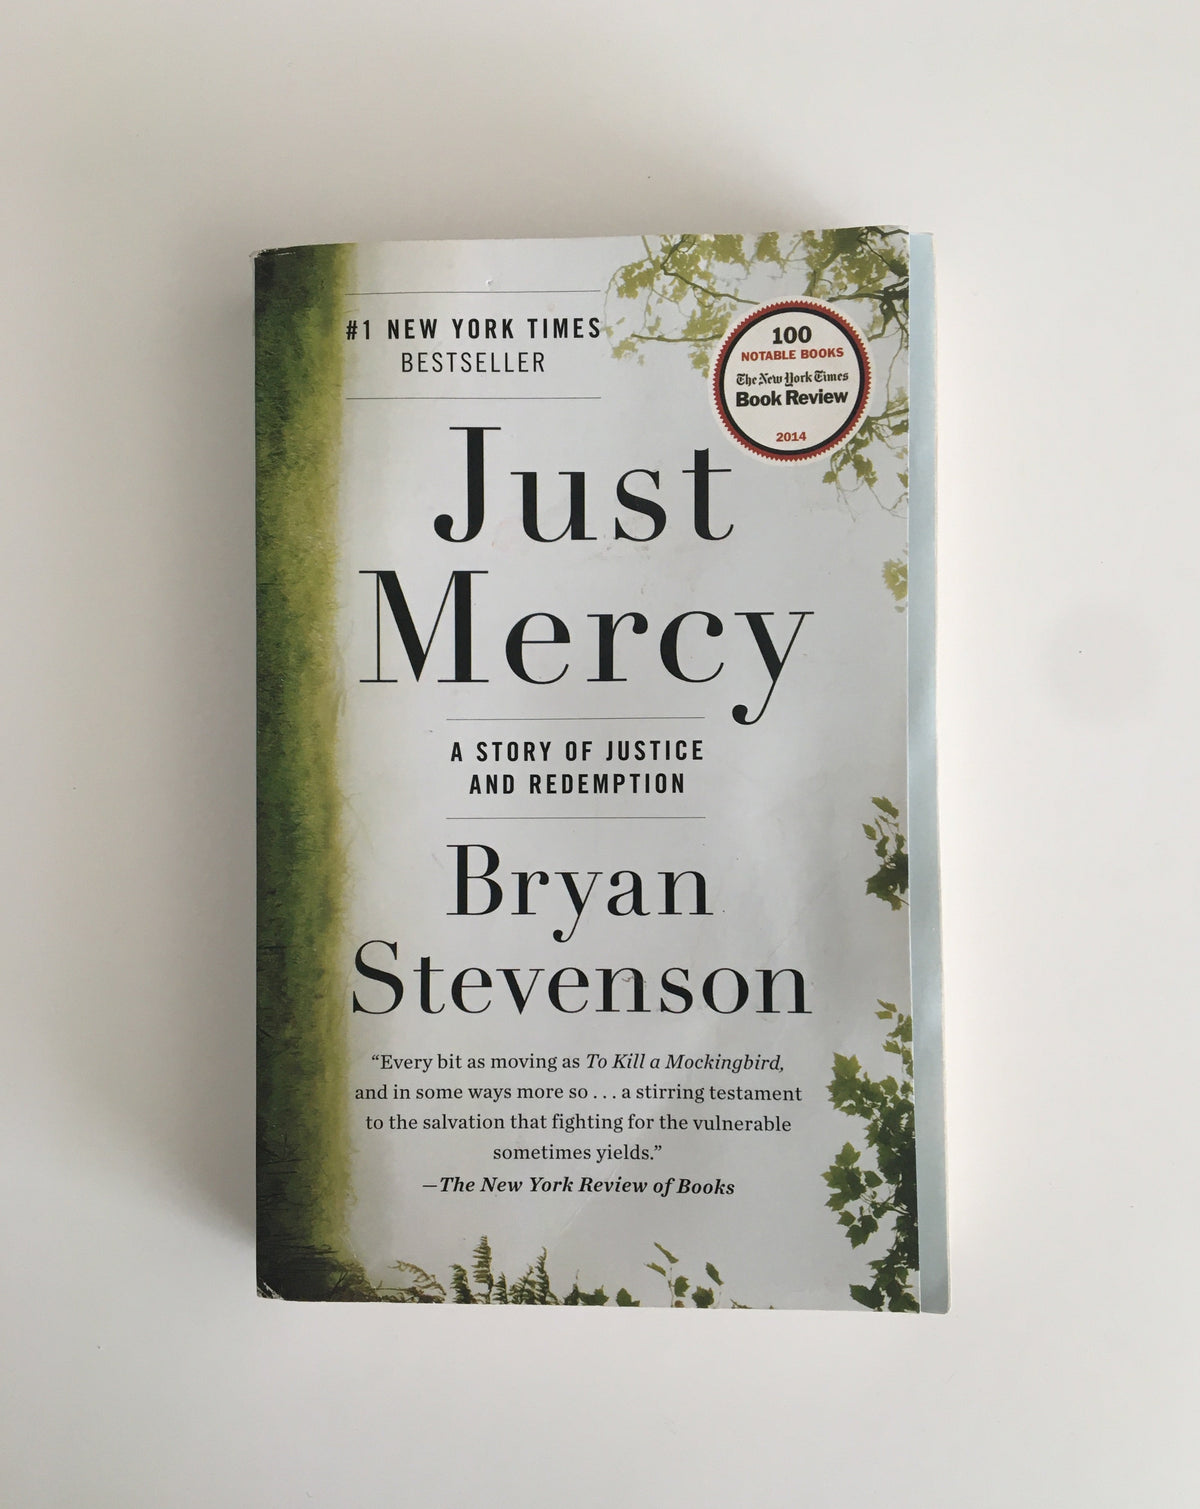 Donate: Just Mercy: A Story of Justice and Redemption by Bryan Stevenson